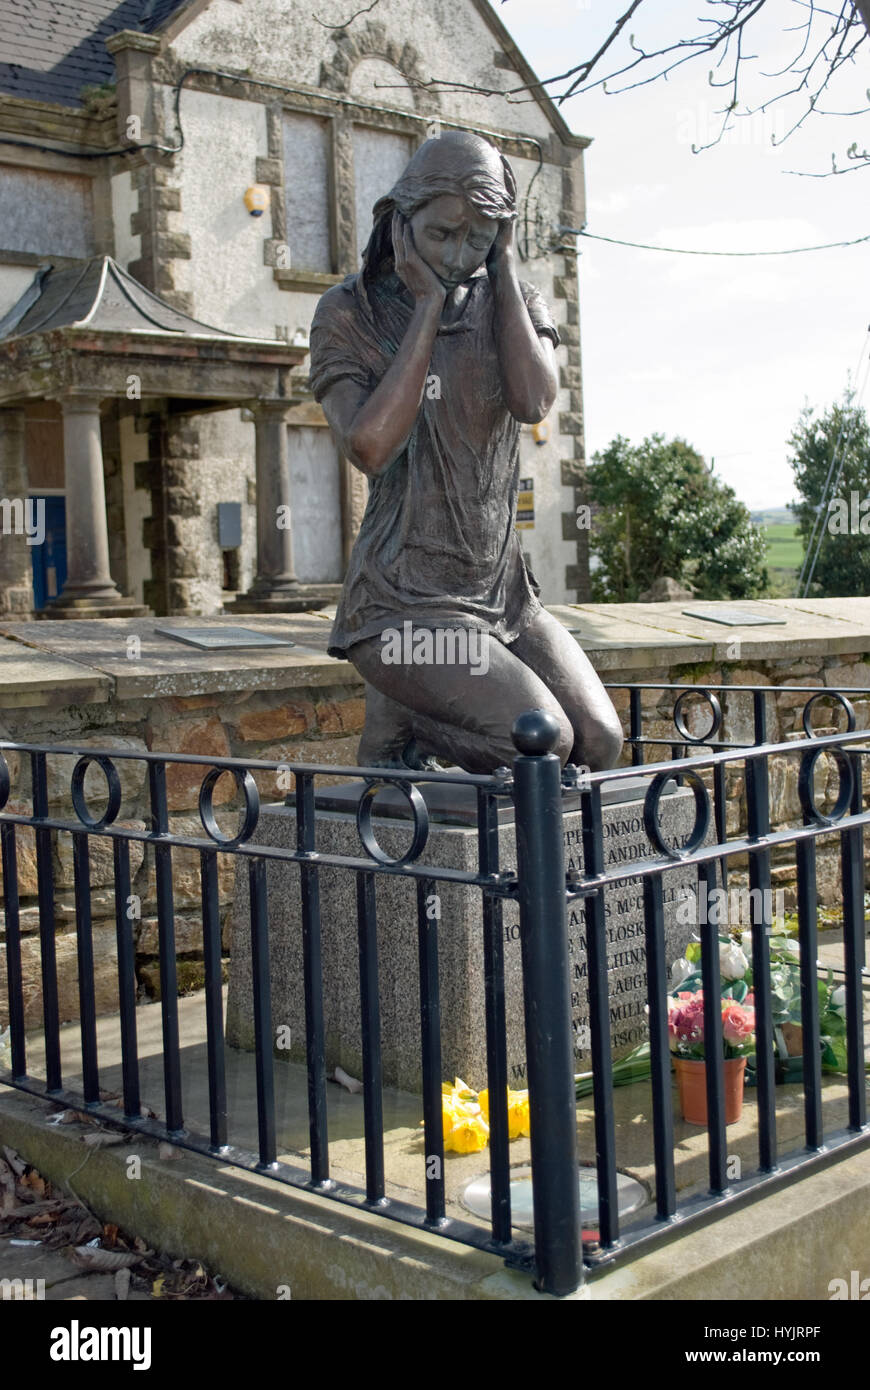 Bronze memorial statue of a girl commerating the victims of the 1972 'Bloody Monday' bomb blast which killed nine in the village of Claudy. Stock Photo